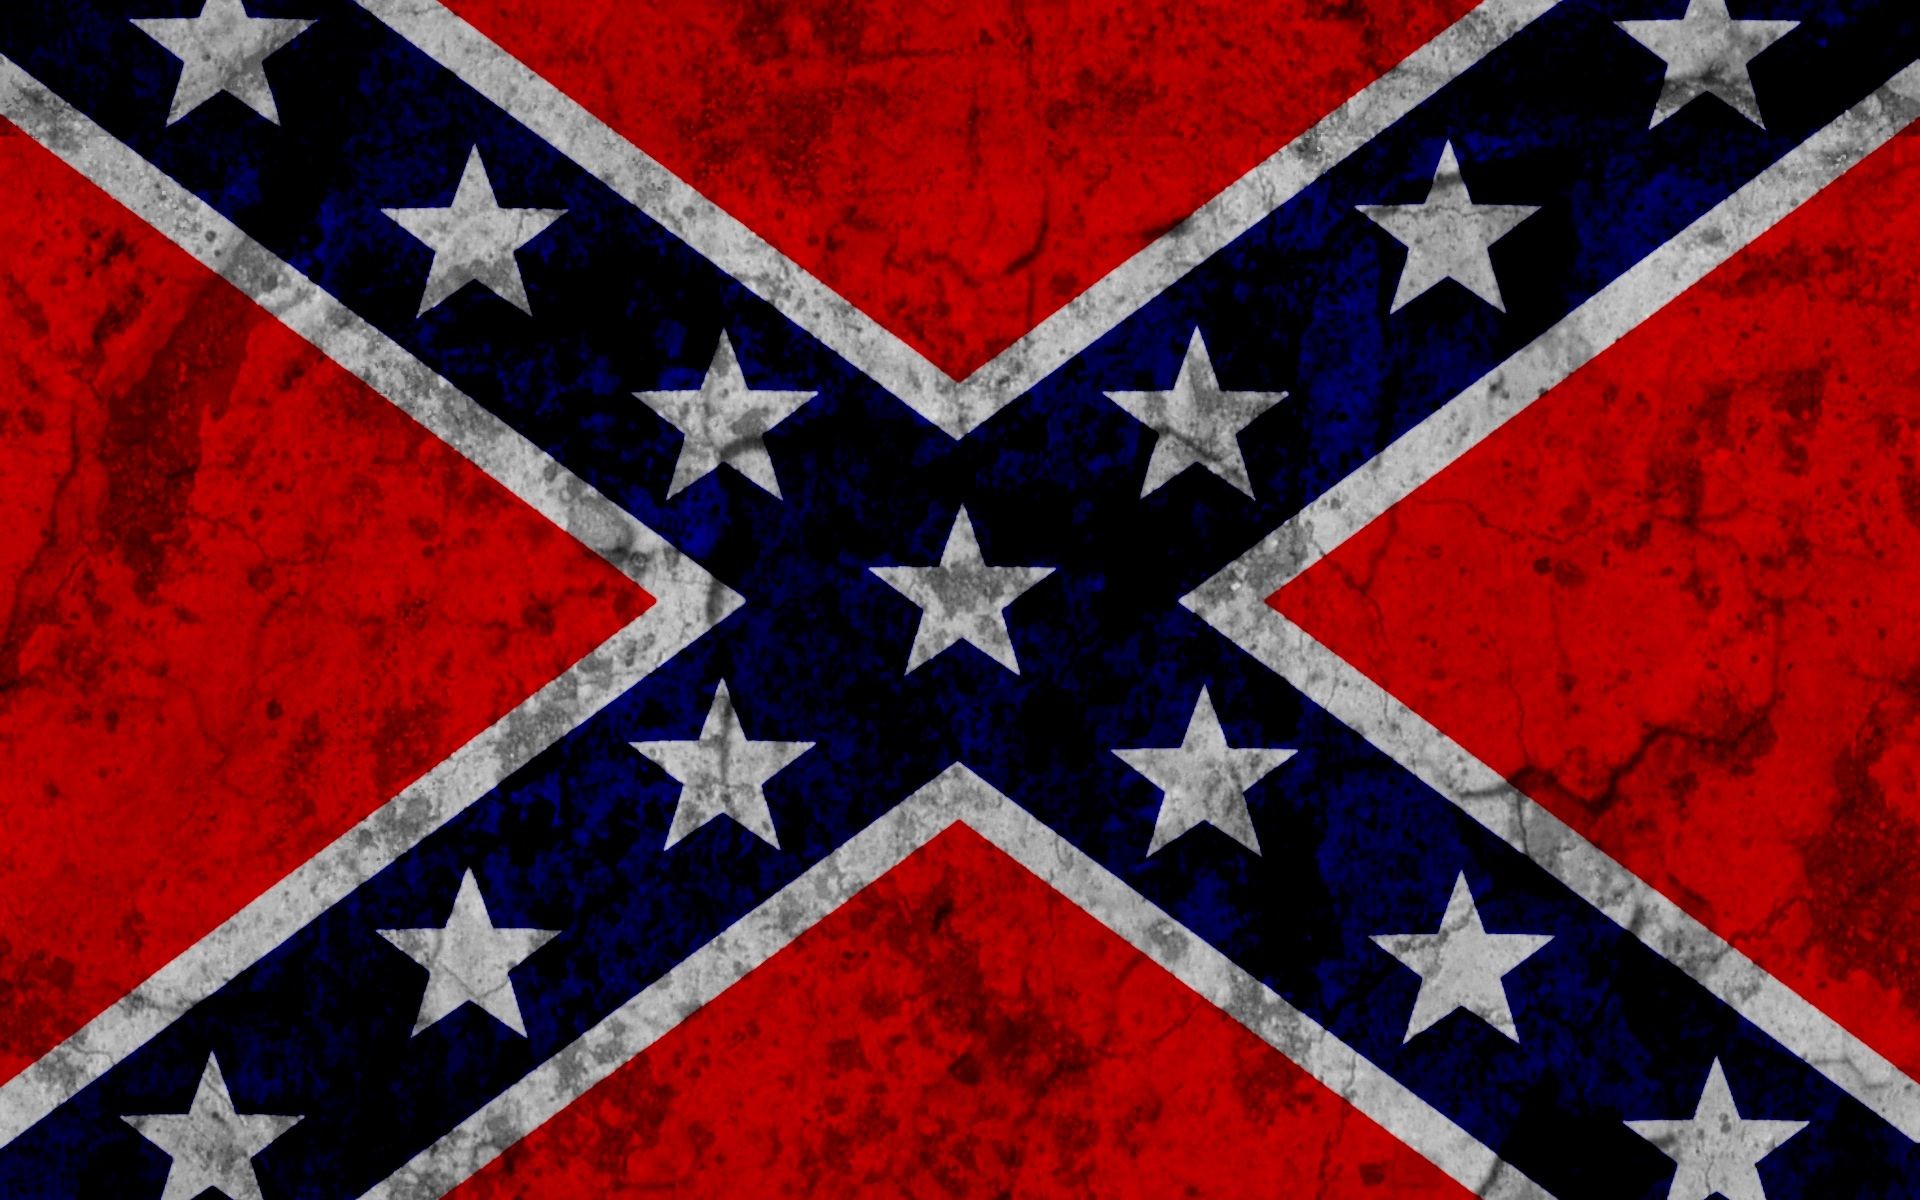 Rebel Flag Wallpaper For Android 76 Images Lmanberg, lmanburg, lmanberg flag, lmanburg flag, minecraft game, revolution, eret, minecraft, boi, dream smp, smp, online game, game, youtuber, tommyinnit, wilbur, twitch, lmanberg browse millions of popular computer wallpapers and ringtones on zedge and personalize your phone to suit you. getwallpapers com